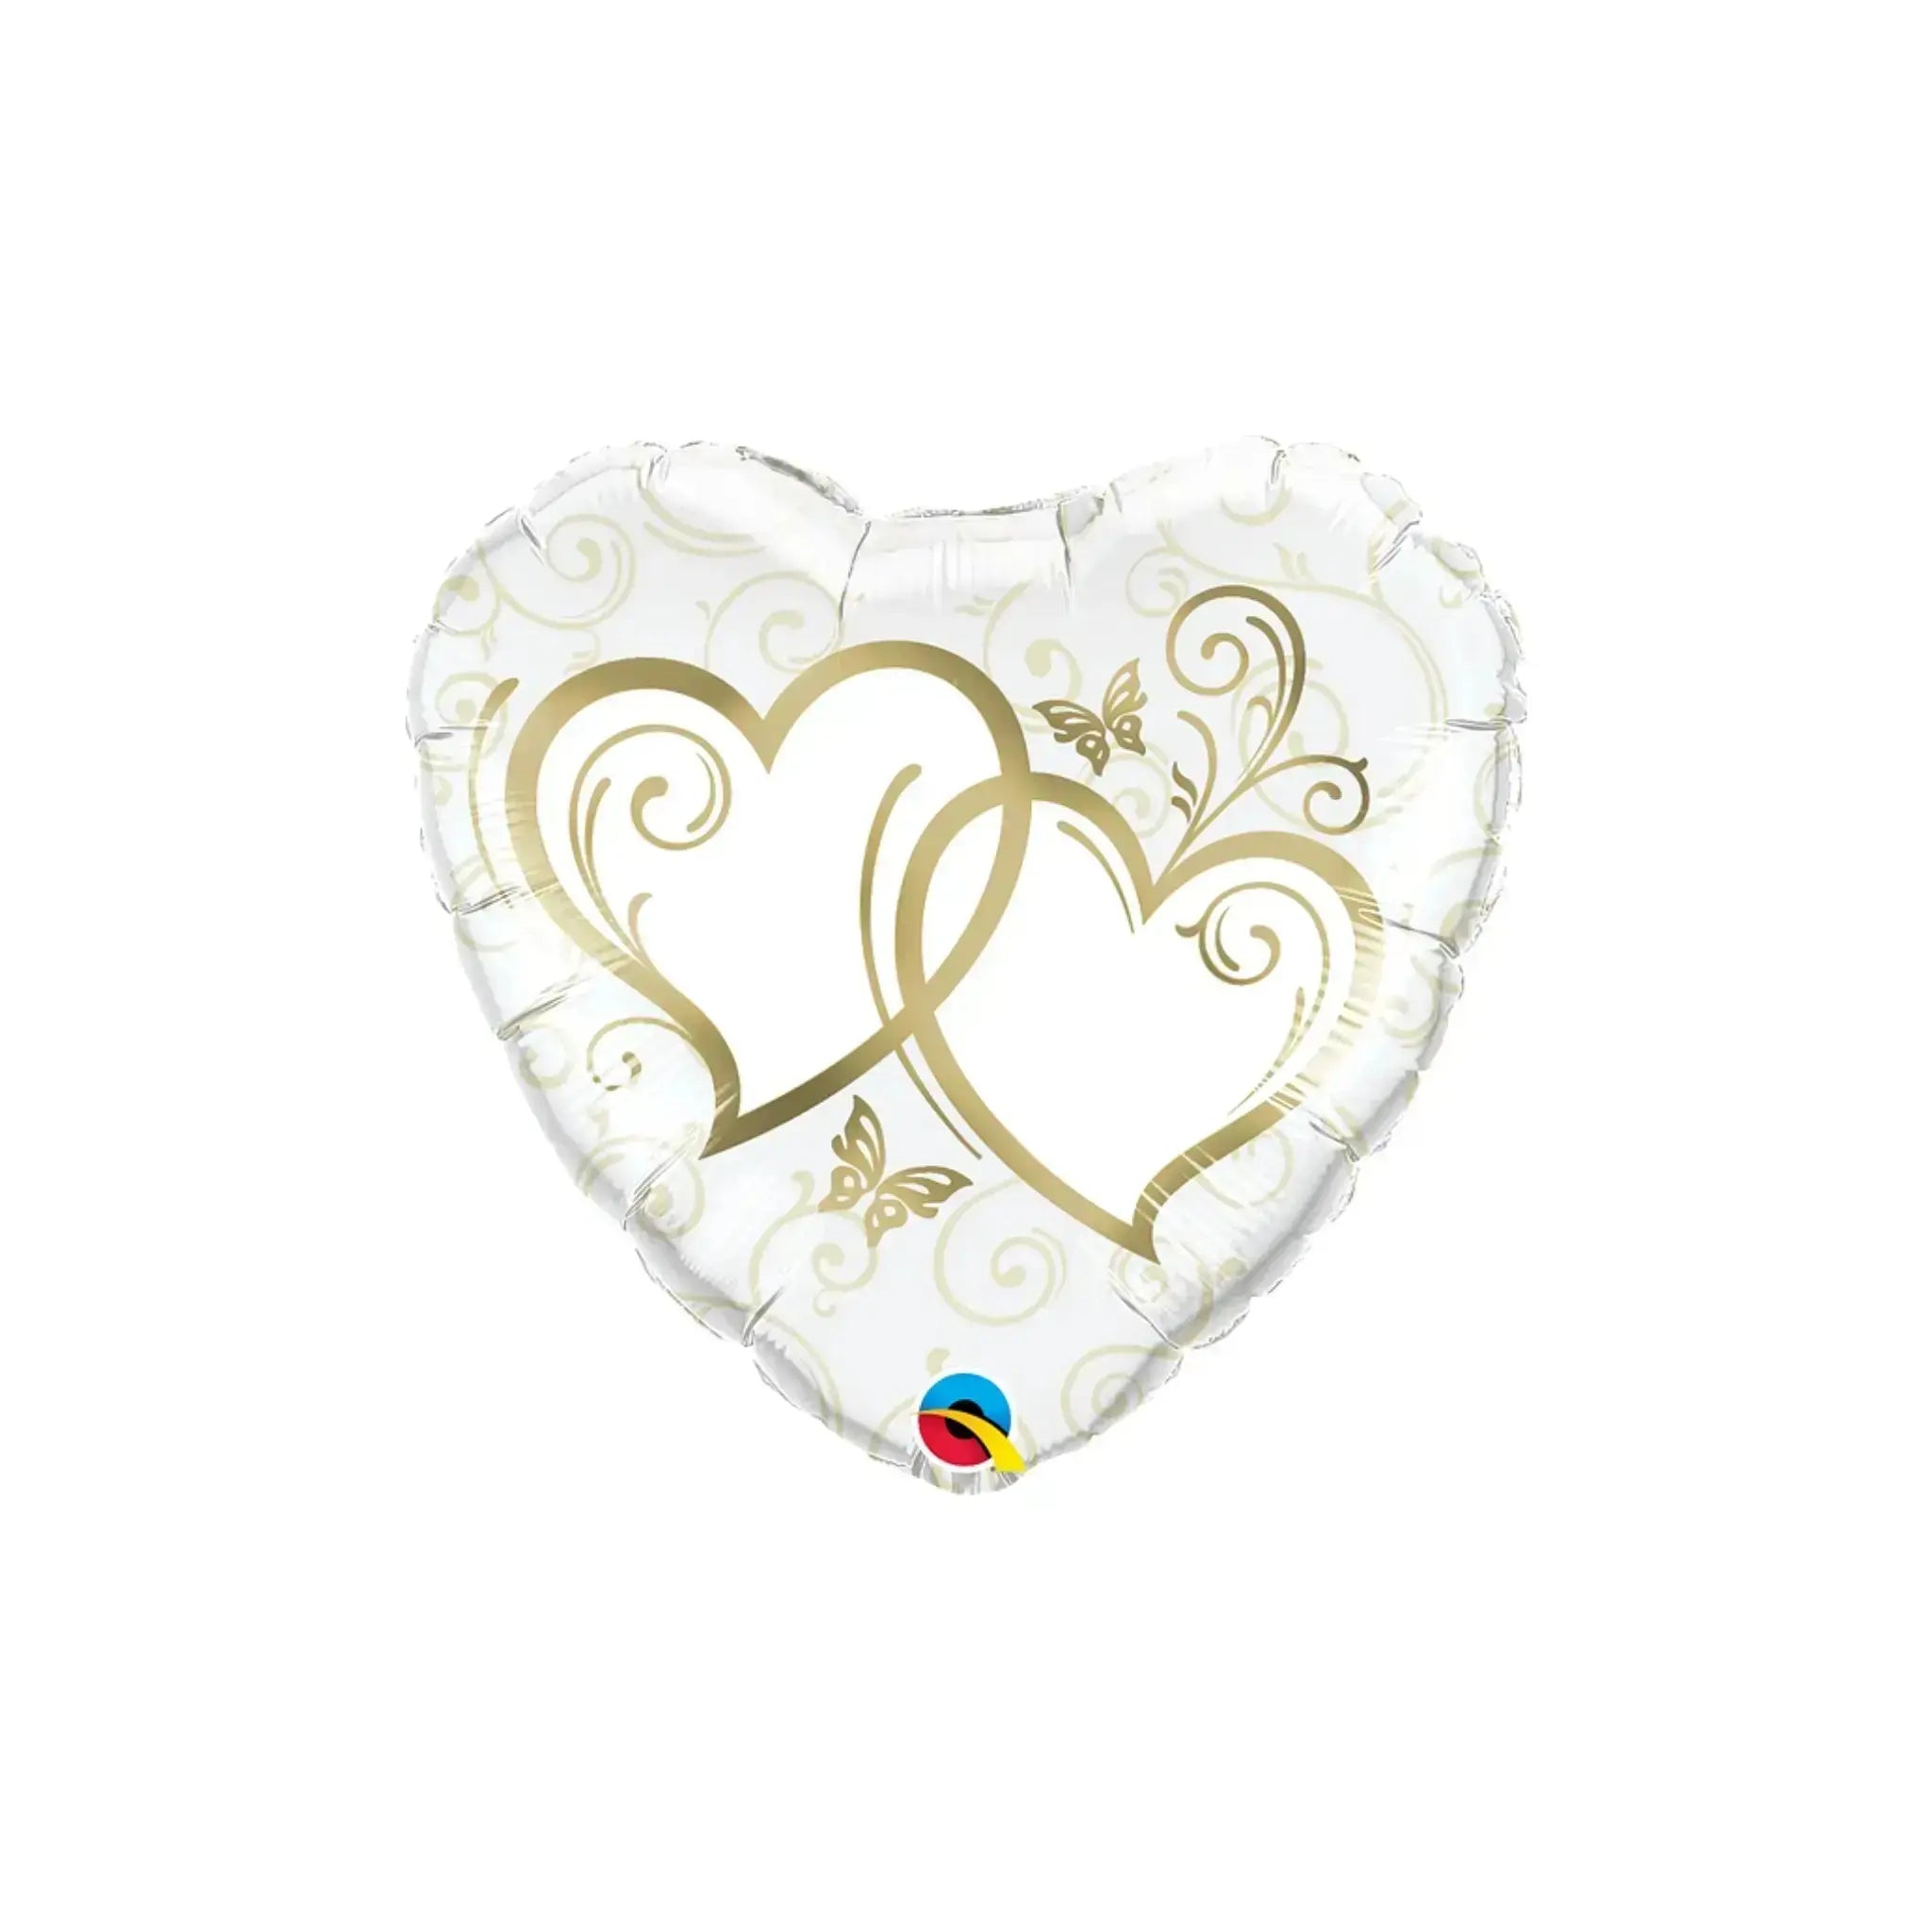 Entwined Gold Hearts Balloon | The Party Hut